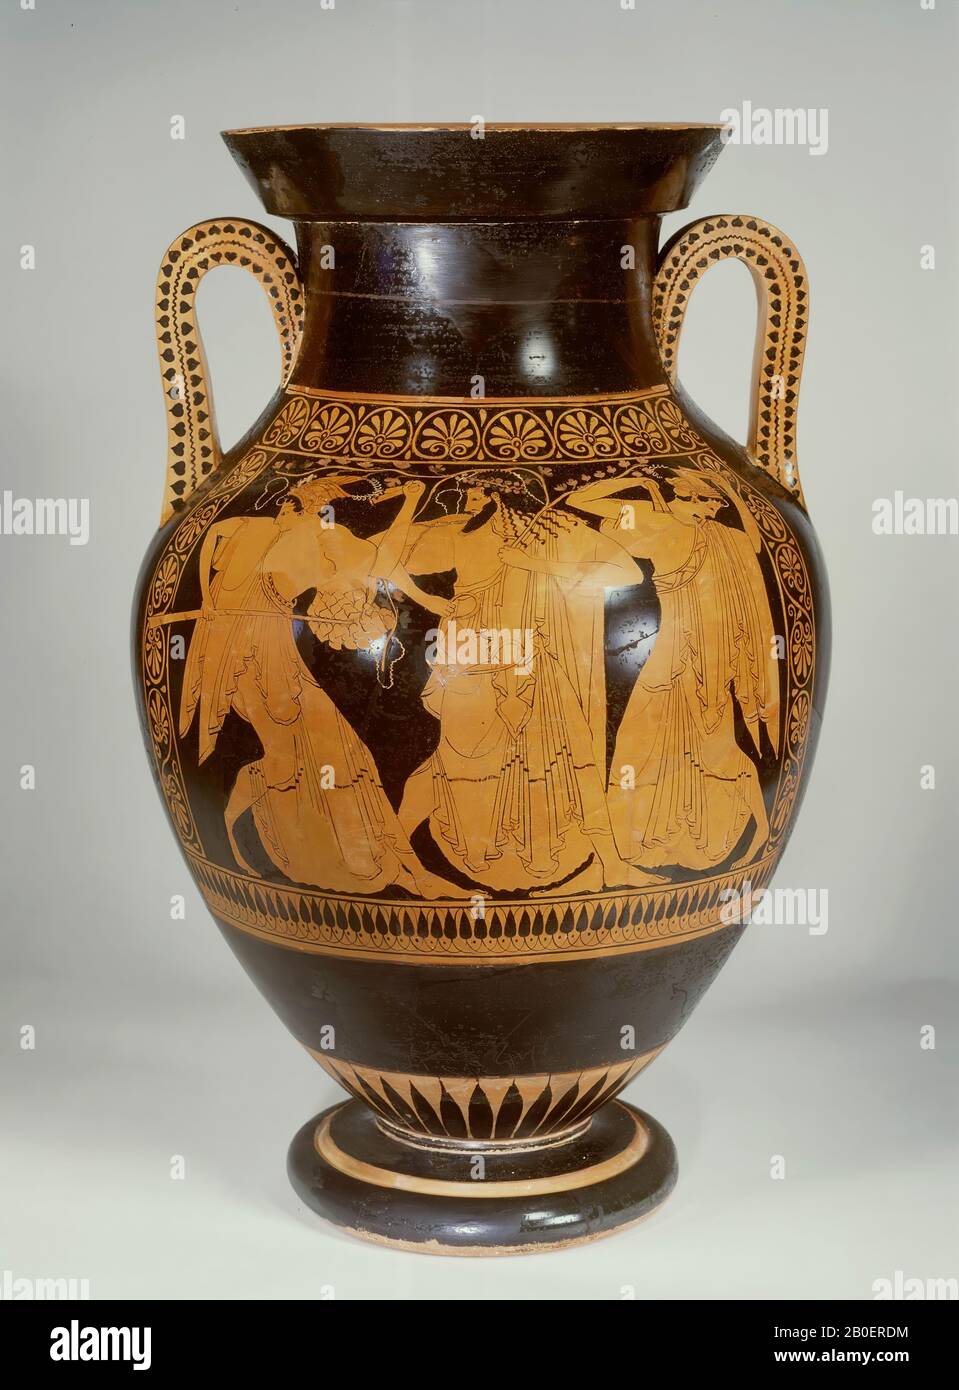 Attic red-figure amphora. A. Heroes quarelling (2 warriors, 2 boys and 1 hoplite) B. Dionysos accompanied by 2 dancing maenads. Pezzion Painter. Attic red-figured abdominal amphora (starting time of the red-figured technique). Pezzino painter. A: two heroes want to attack each other. Young boys try to prevent this, while an armed hoplite intervenes. B: Dionysos, vase, amphora, belly amphora, earthenware, red-figured, Attic, 58.5 cm, ø 39 cm, red-figured, Attic, Pezzino painter 500 BC, Italy, Greece Stock Photo